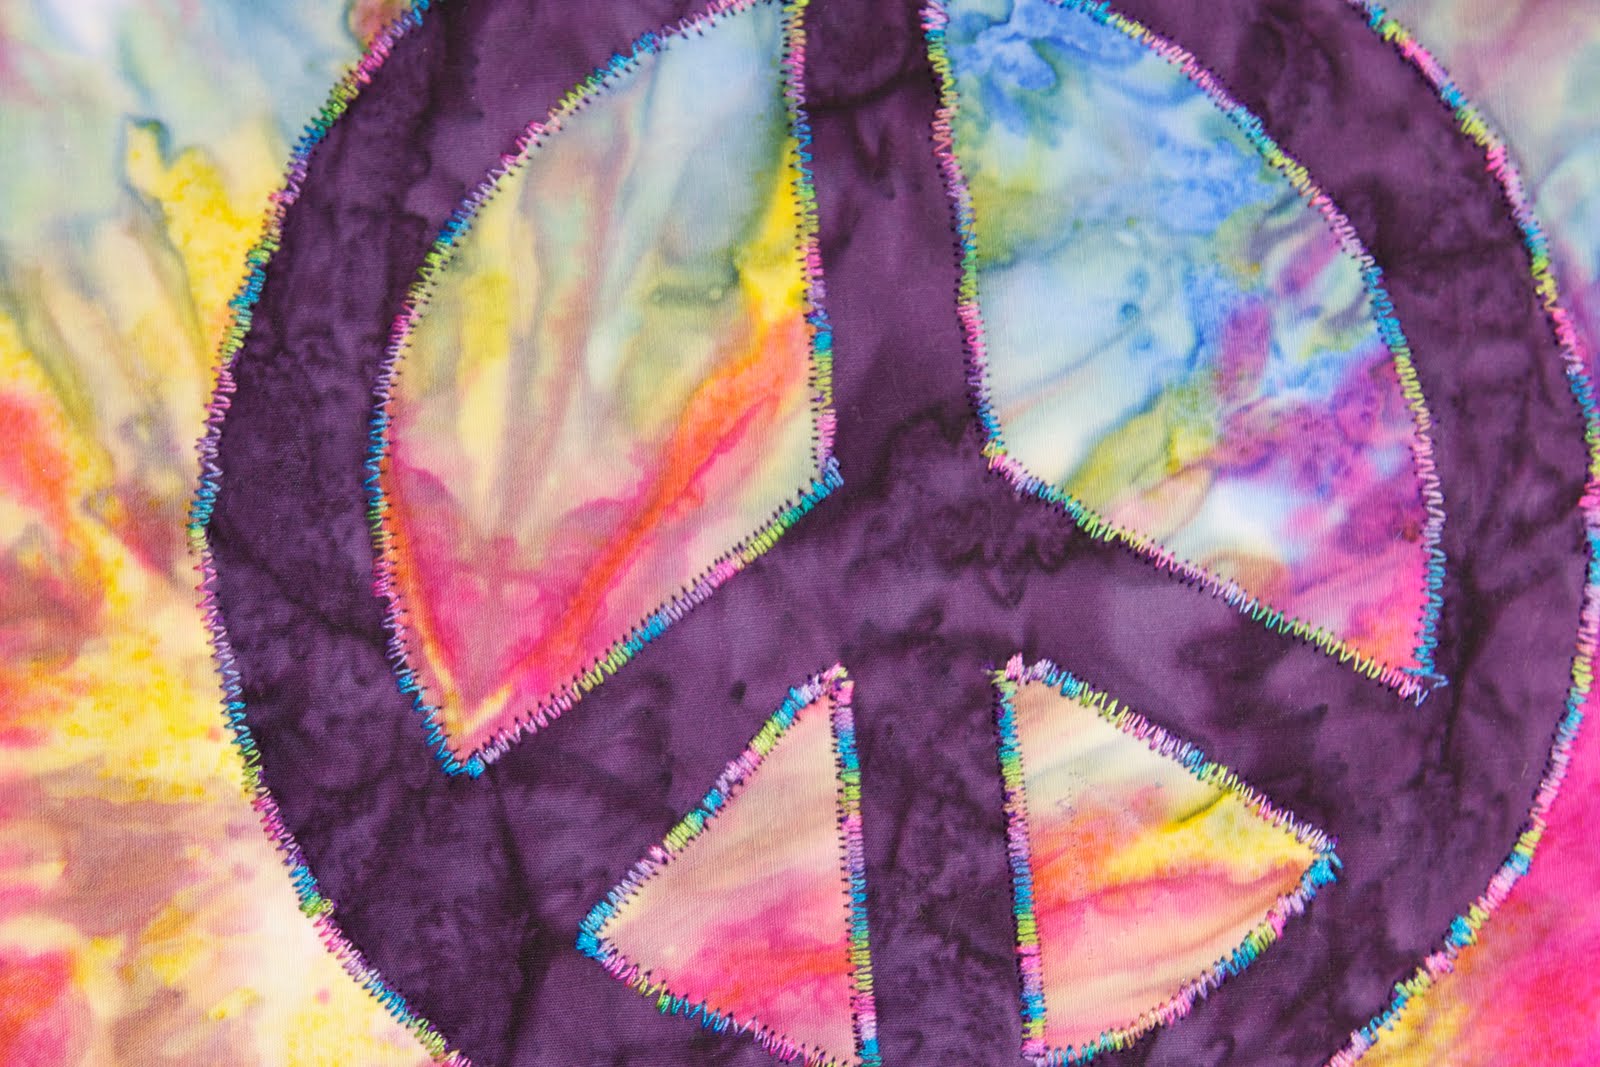 tried some new techniques the peace sign is reverse applique and I